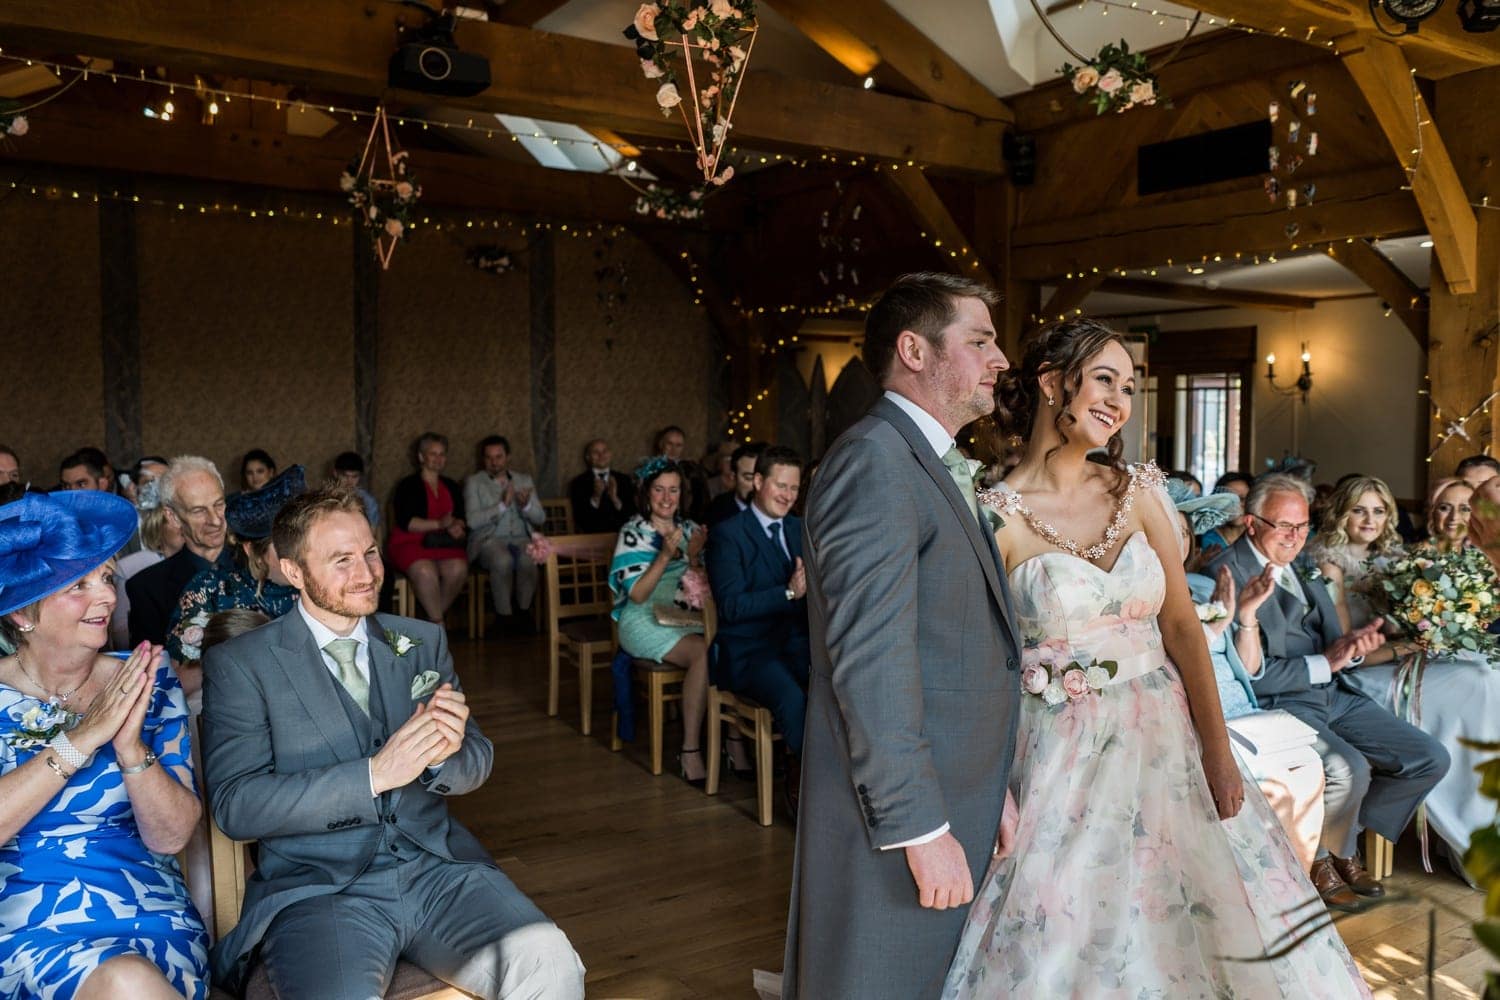 Marriage ceremony at King Arthur Hotel in South Wales